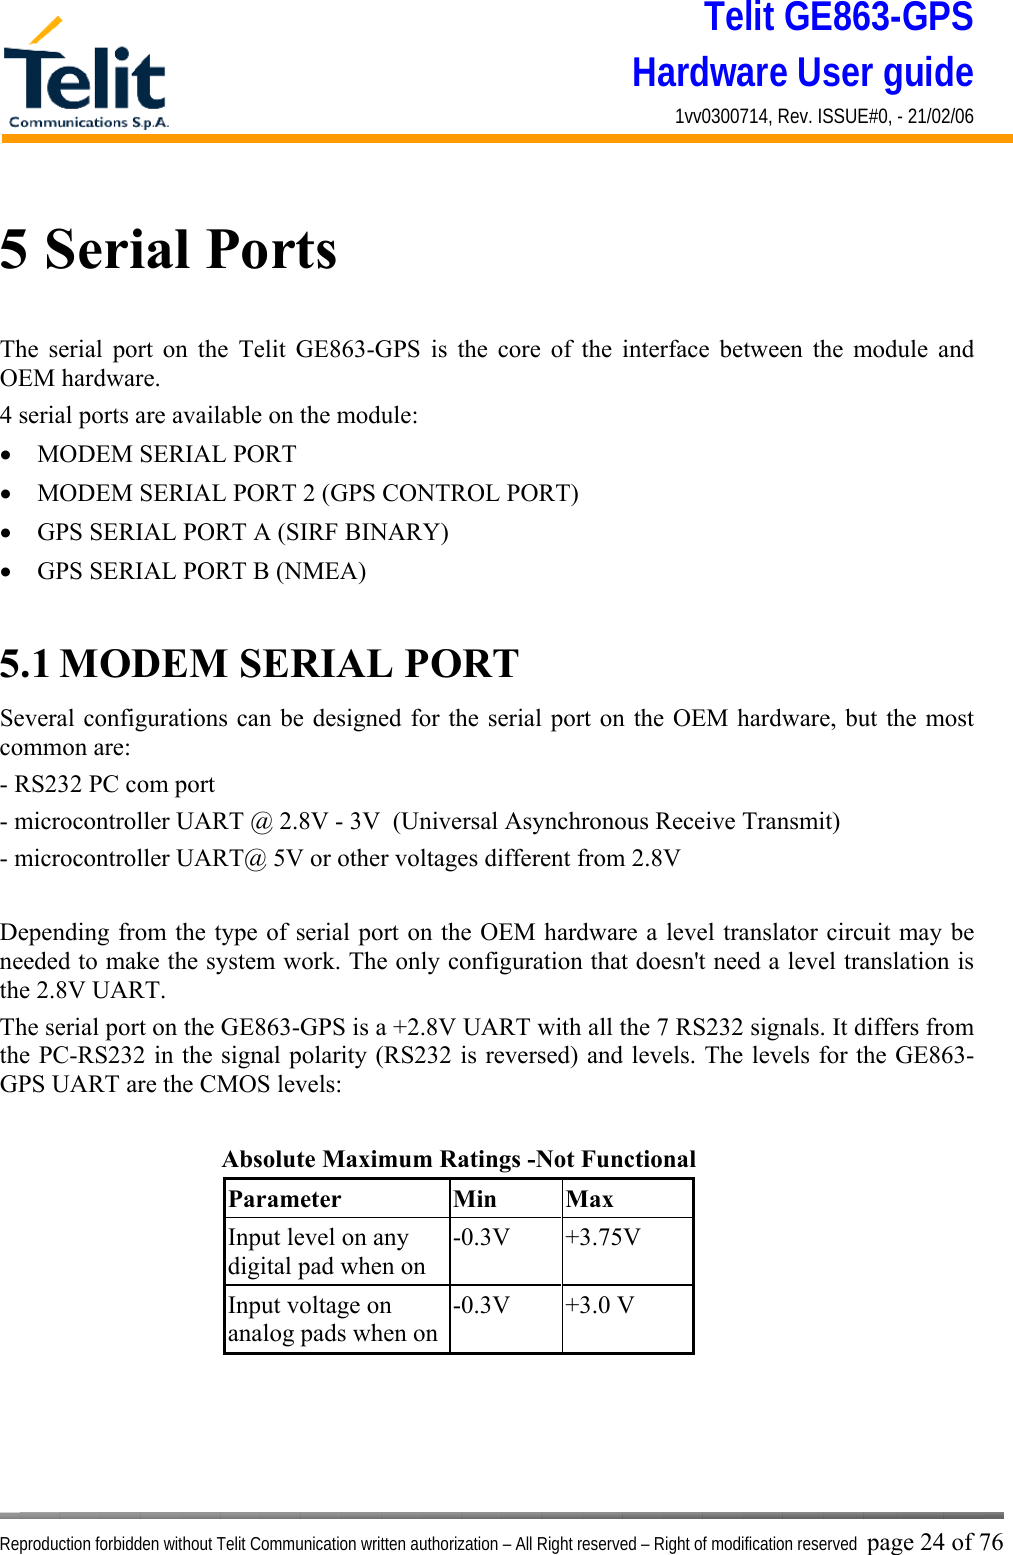 Telit GE863-GPS Hardware User guide 1vv0300714, Rev. ISSUE#0, - 21/02/06    Reproduction forbidden without Telit Communication written authorization – All Right reserved – Right of modification reserved page 24 of 76 5 Serial Ports The serial port on the Telit GE863-GPS is the core of the interface between the module and OEM hardware.  4 serial ports are available on the module: •  MODEM SERIAL PORT •  MODEM SERIAL PORT 2 (GPS CONTROL PORT) •  GPS SERIAL PORT A (SIRF BINARY) •  GPS SERIAL PORT B (NMEA)  5.1 MODEM SERIAL PORT Several configurations can be designed for the serial port on the OEM hardware, but the most common are: - RS232 PC com port - microcontroller UART @ 2.8V - 3V  (Universal Asynchronous Receive Transmit)  - microcontroller UART@ 5V or other voltages different from 2.8V   Depending from the type of serial port on the OEM hardware a level translator circuit may be needed to make the system work. The only configuration that doesn&apos;t need a level translation is the 2.8V UART. The serial port on the GE863-GPS is a +2.8V UART with all the 7 RS232 signals. It differs from the PC-RS232 in the signal polarity (RS232 is reversed) and levels. The levels for the GE863-GPS UART are the CMOS levels:     Absolute Maximum Ratings -Not Functional Parameter Min Max Input level on any digital pad when on -0.3V +3.75V Input voltage on analog pads when on-0.3V +3.0 V    